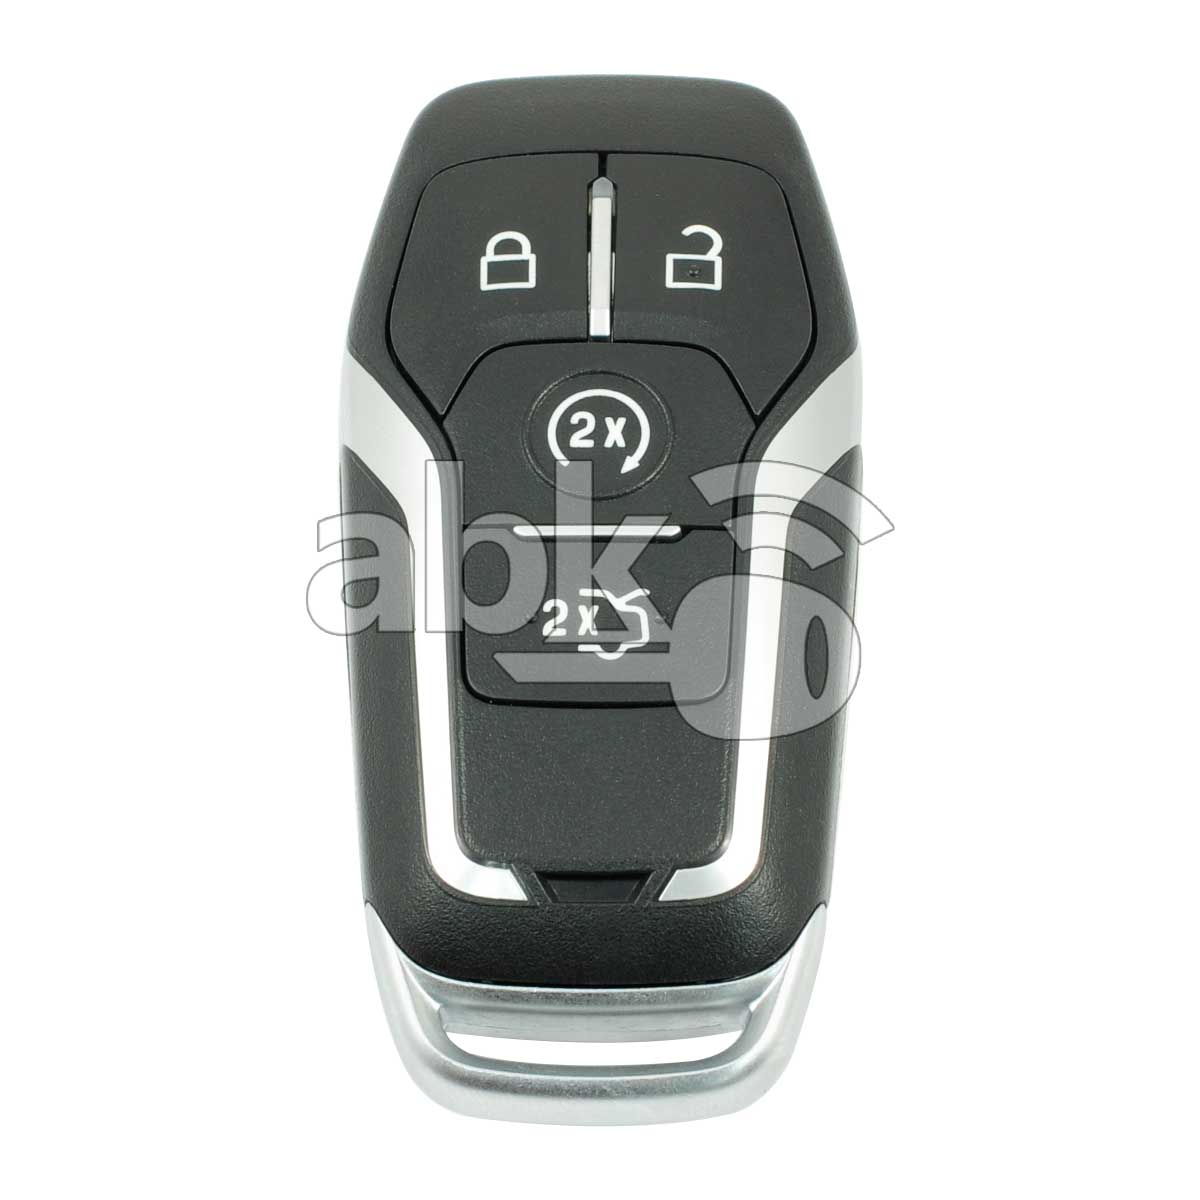 Genuine Ford Mustang 2015+ Smart Key 4Buttons A2C91253902 868MHz - ABK-3788 - ABKEYS.COM